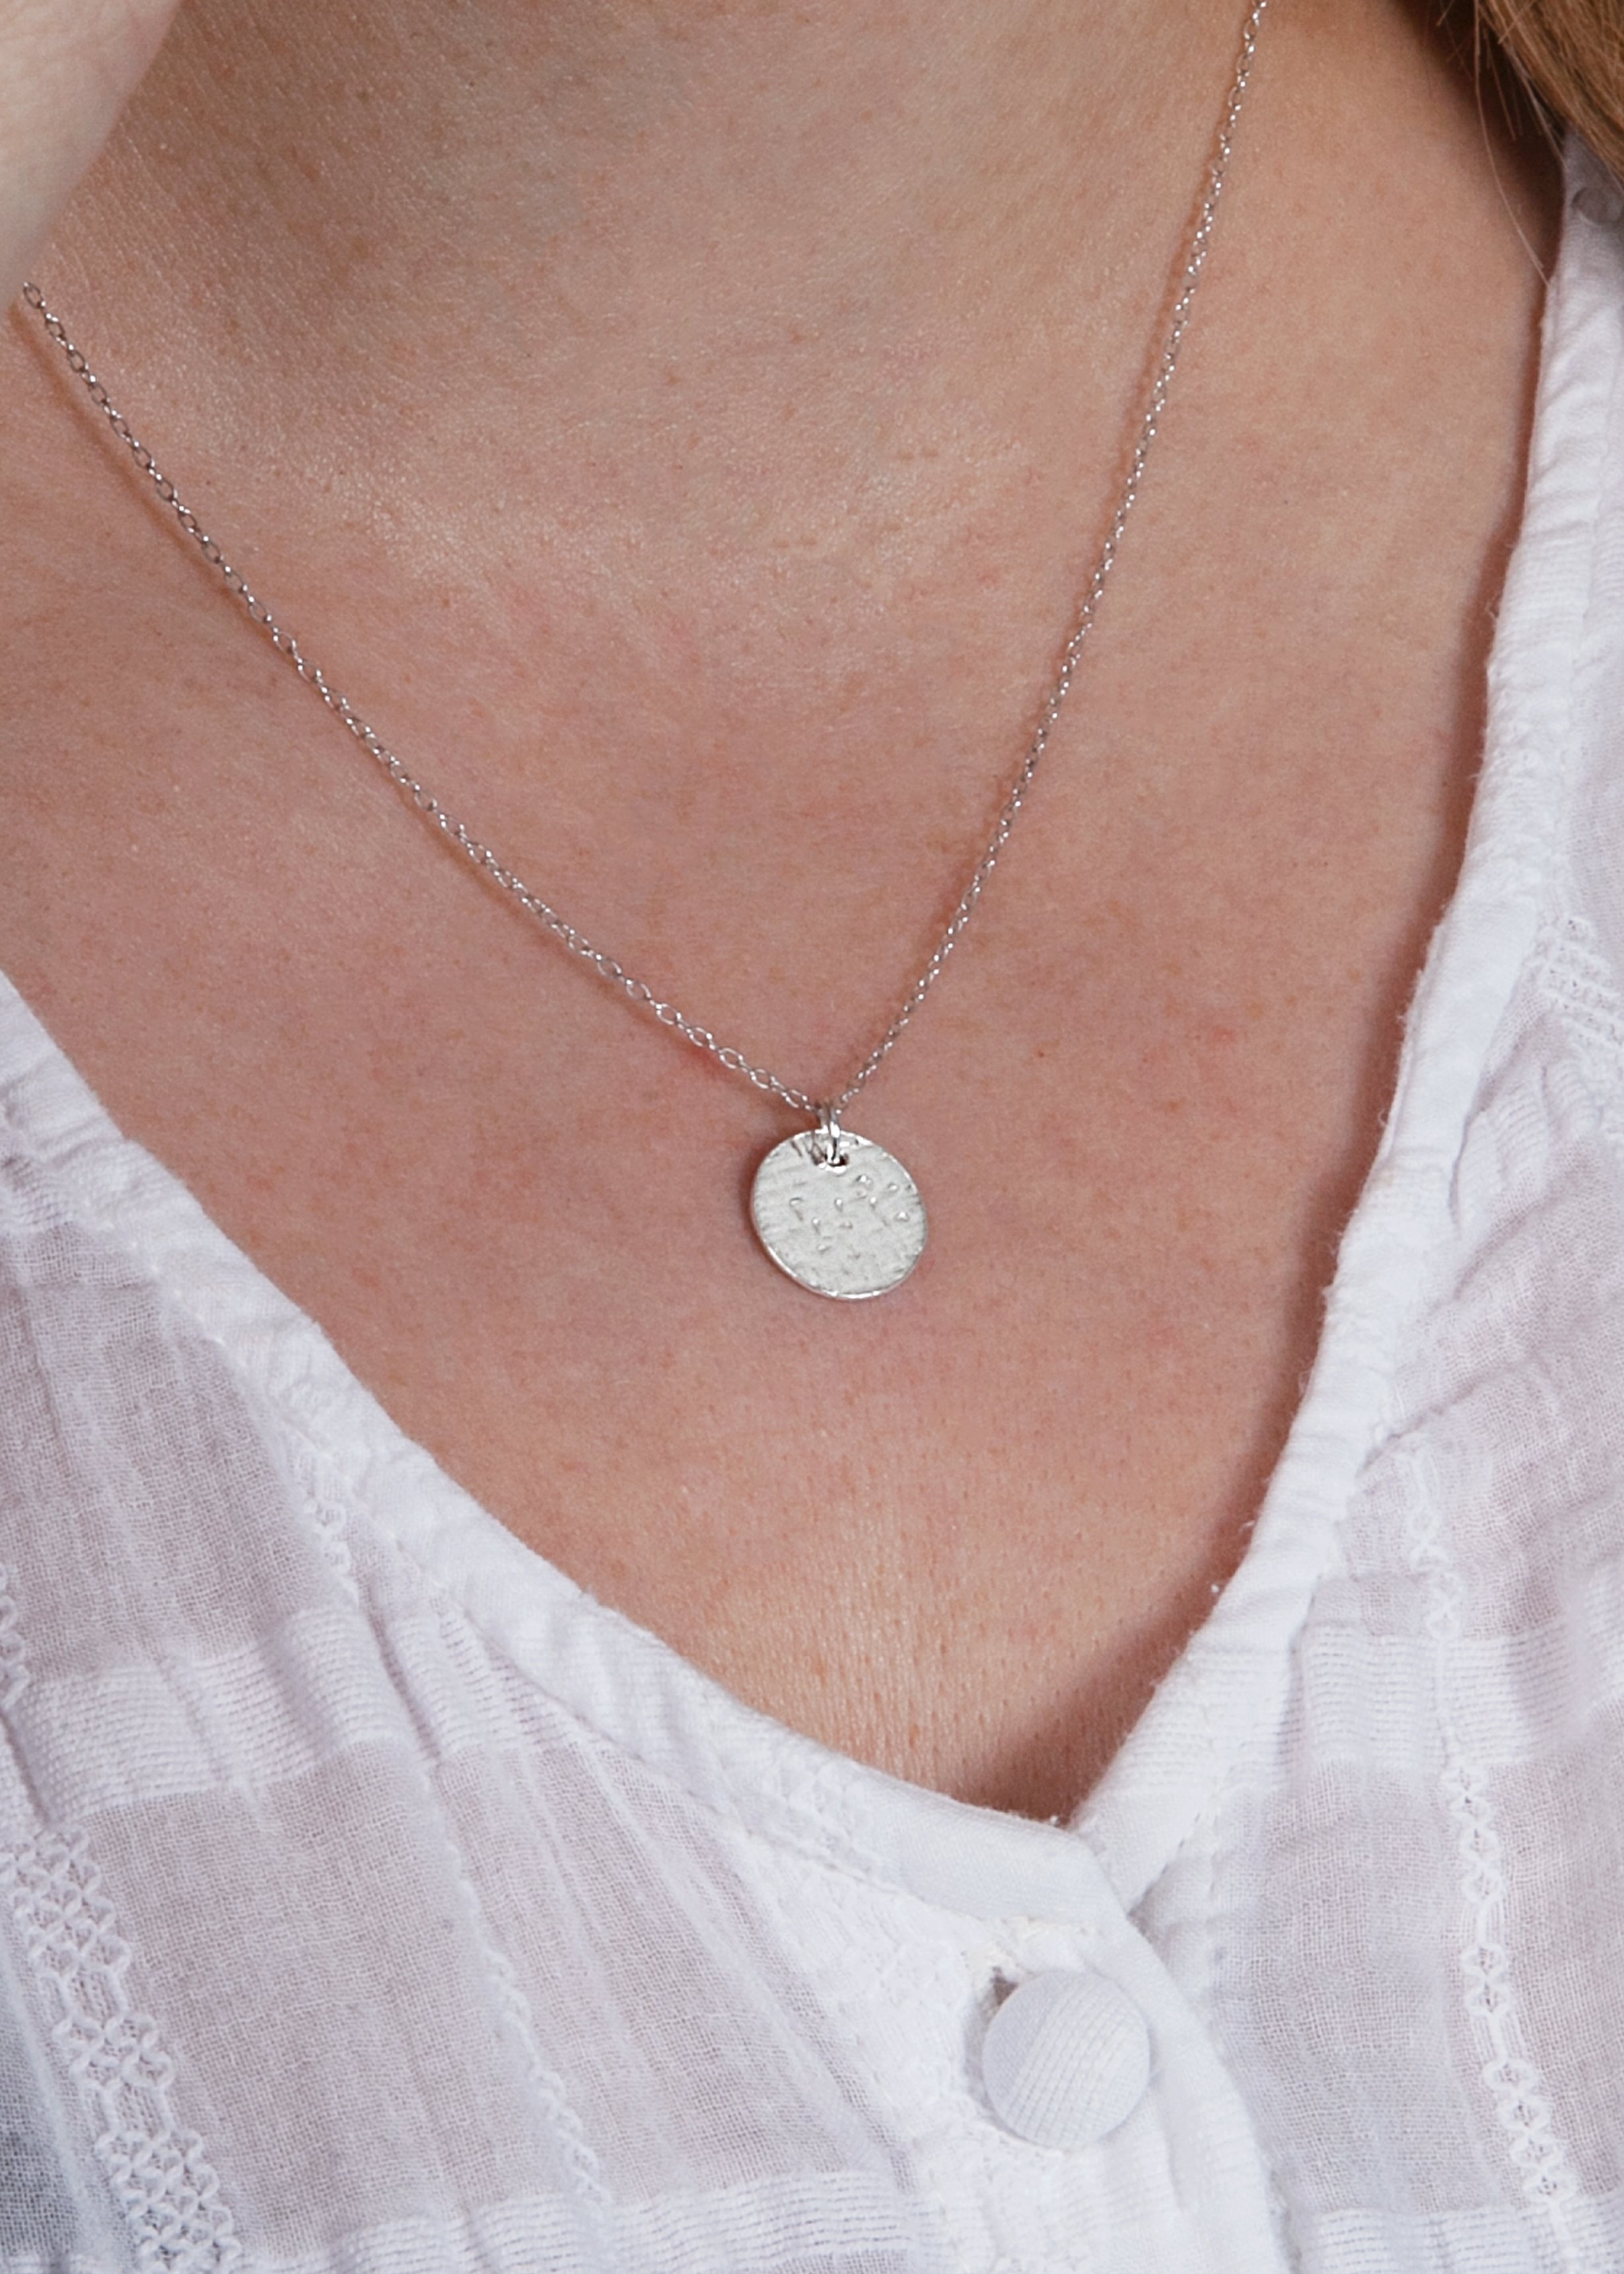 Personalised Cluster Crown Hammered Disc Necklace By Posh Totty Designs |  notonthehighstreet.com